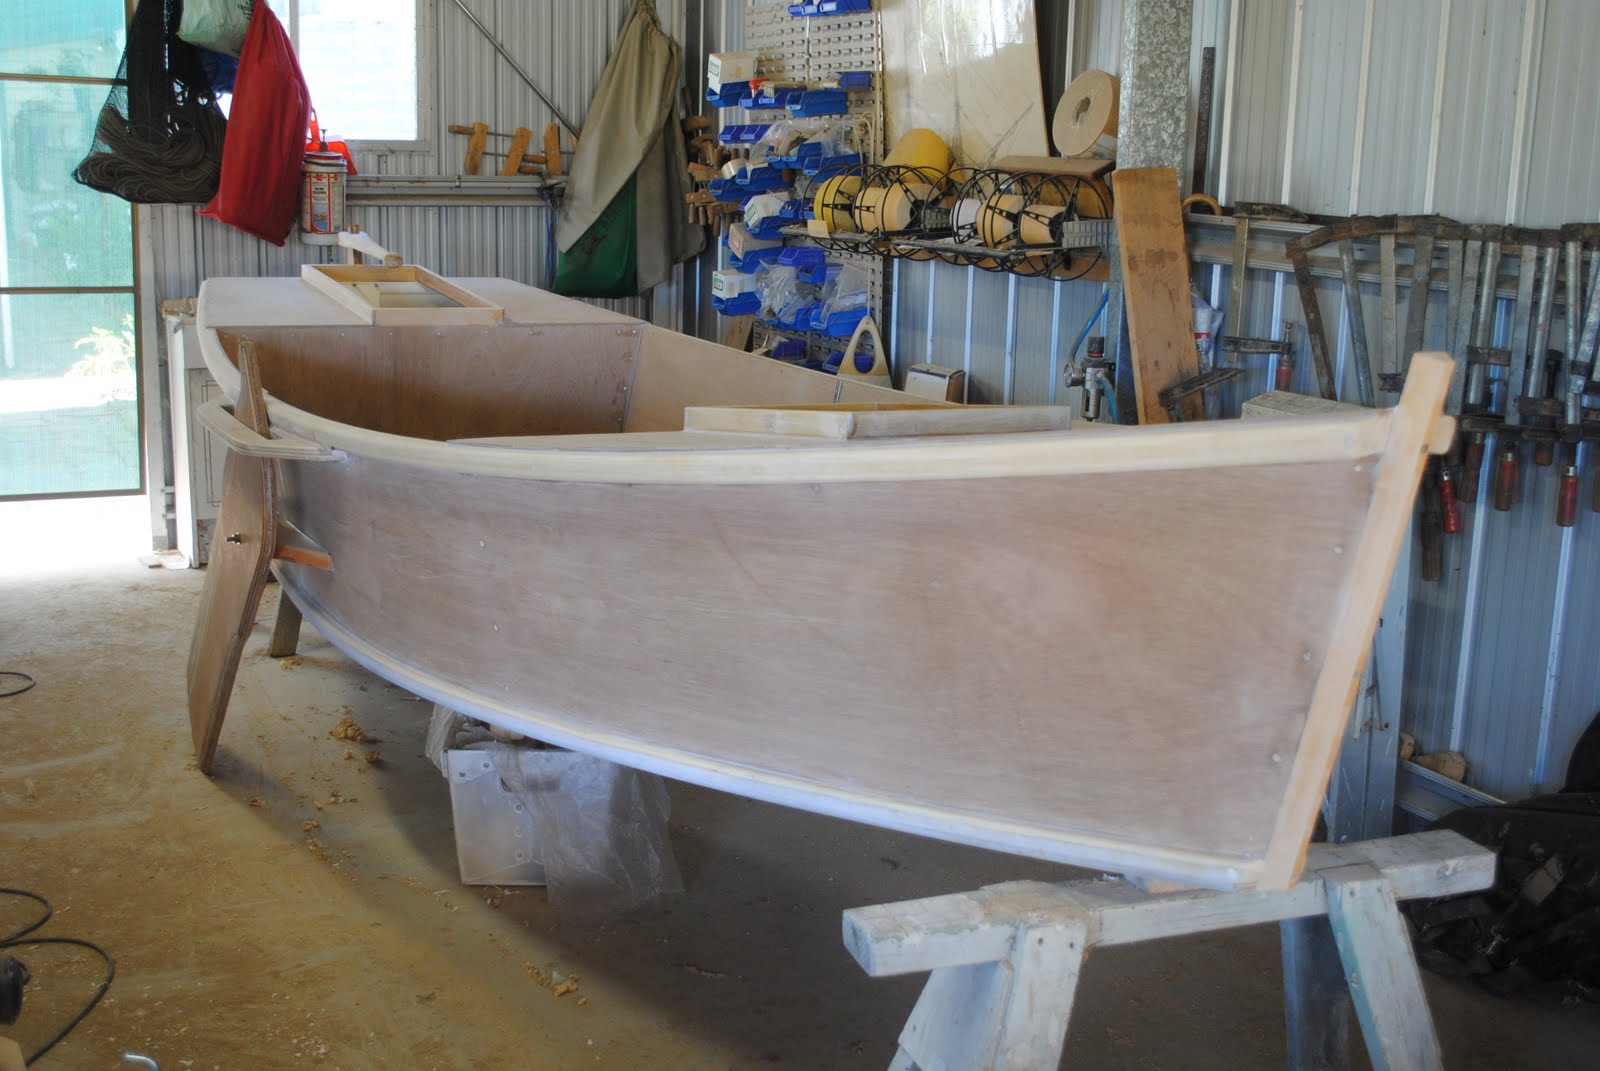 James: Wooden Boat Plans Poling Skiff How to Building Plans